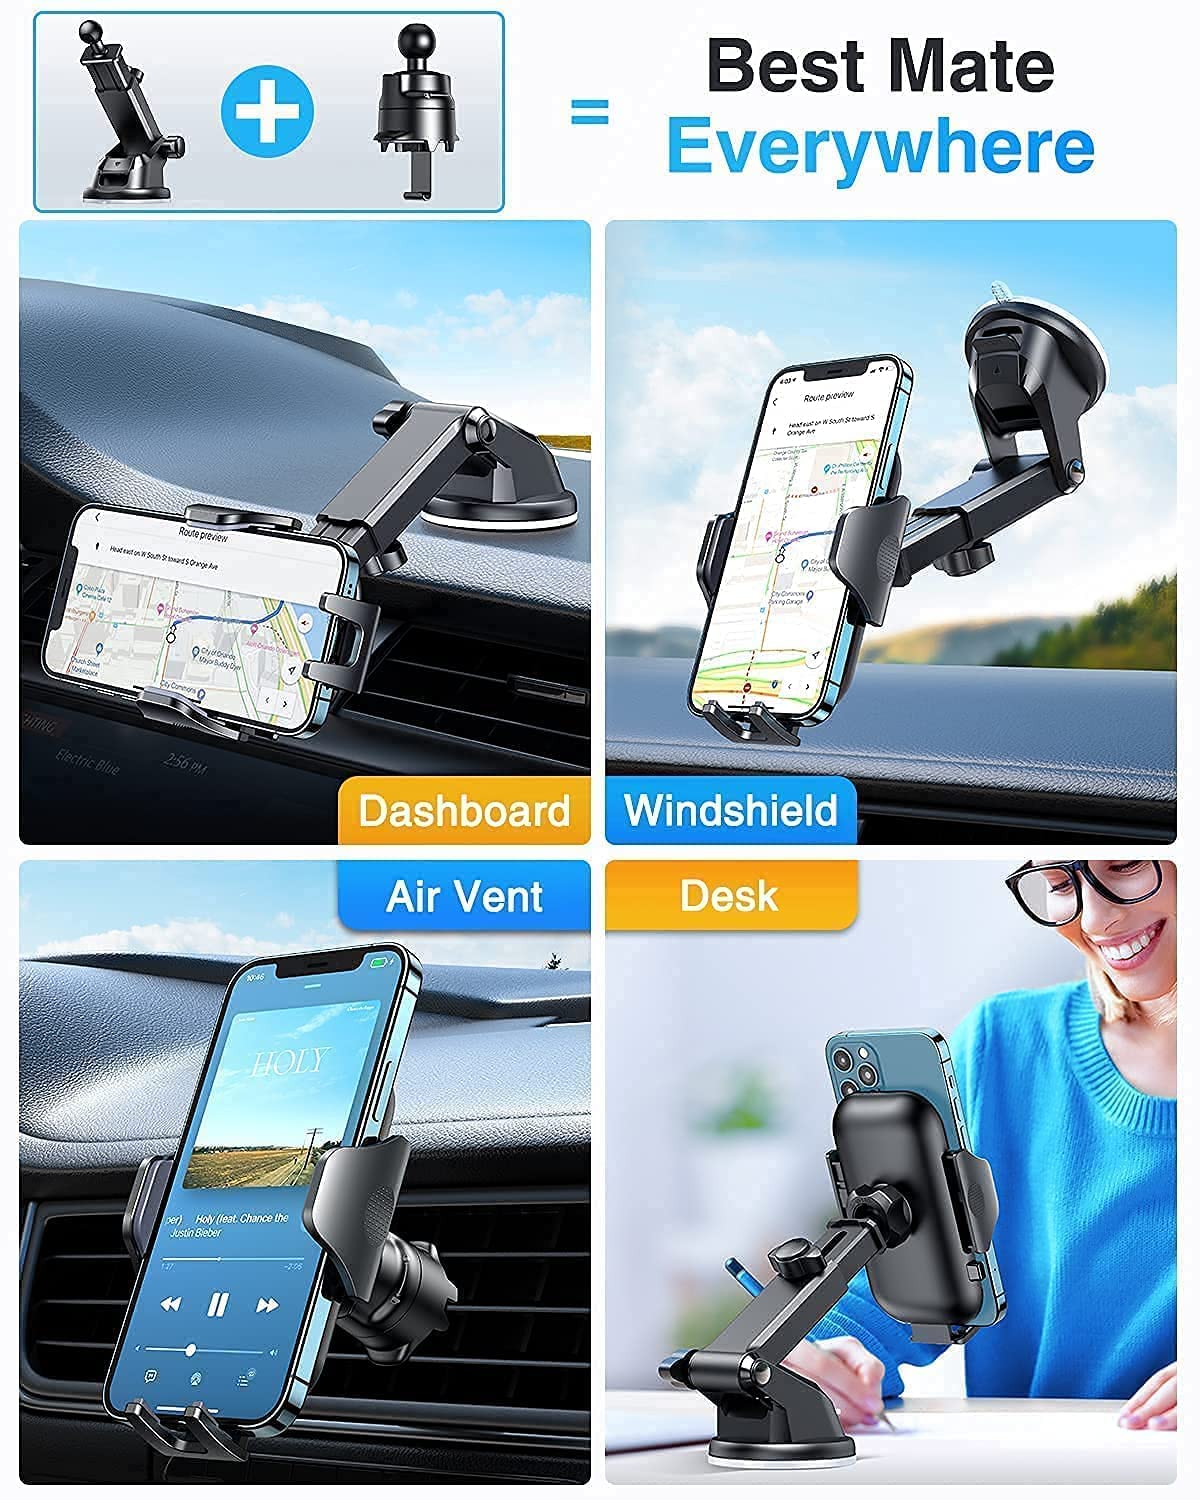 VANMASS Car Phone Holder Mount [2022 Ultimate] Military Suction Retractable Universal Mobile Phone Accessories Automobile Cradle Stand for Dashboard Windscreen Vent Van iPhone 13 Pro Max 12 11 Samsung